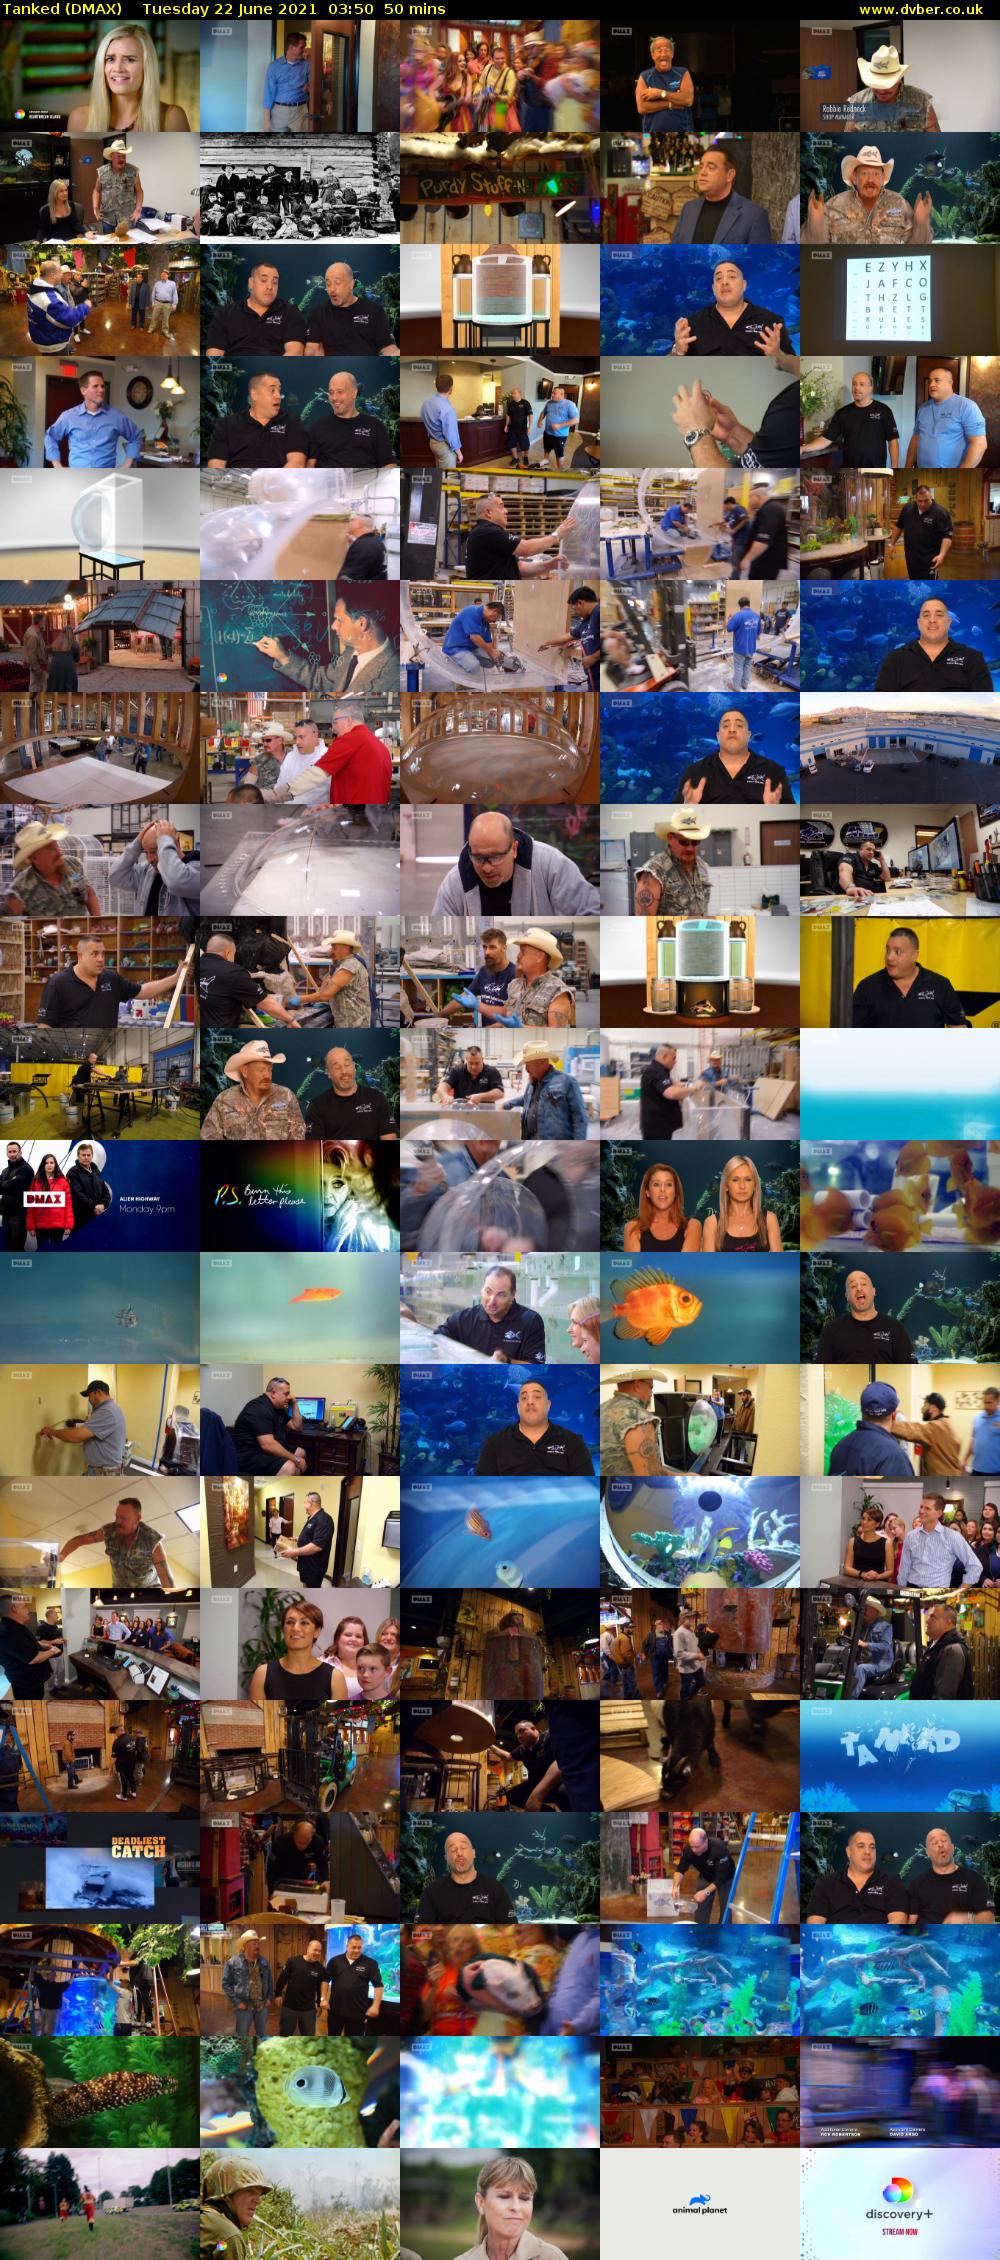 Tanked (DMAX) Tuesday 22 June 2021 03:50 - 04:40